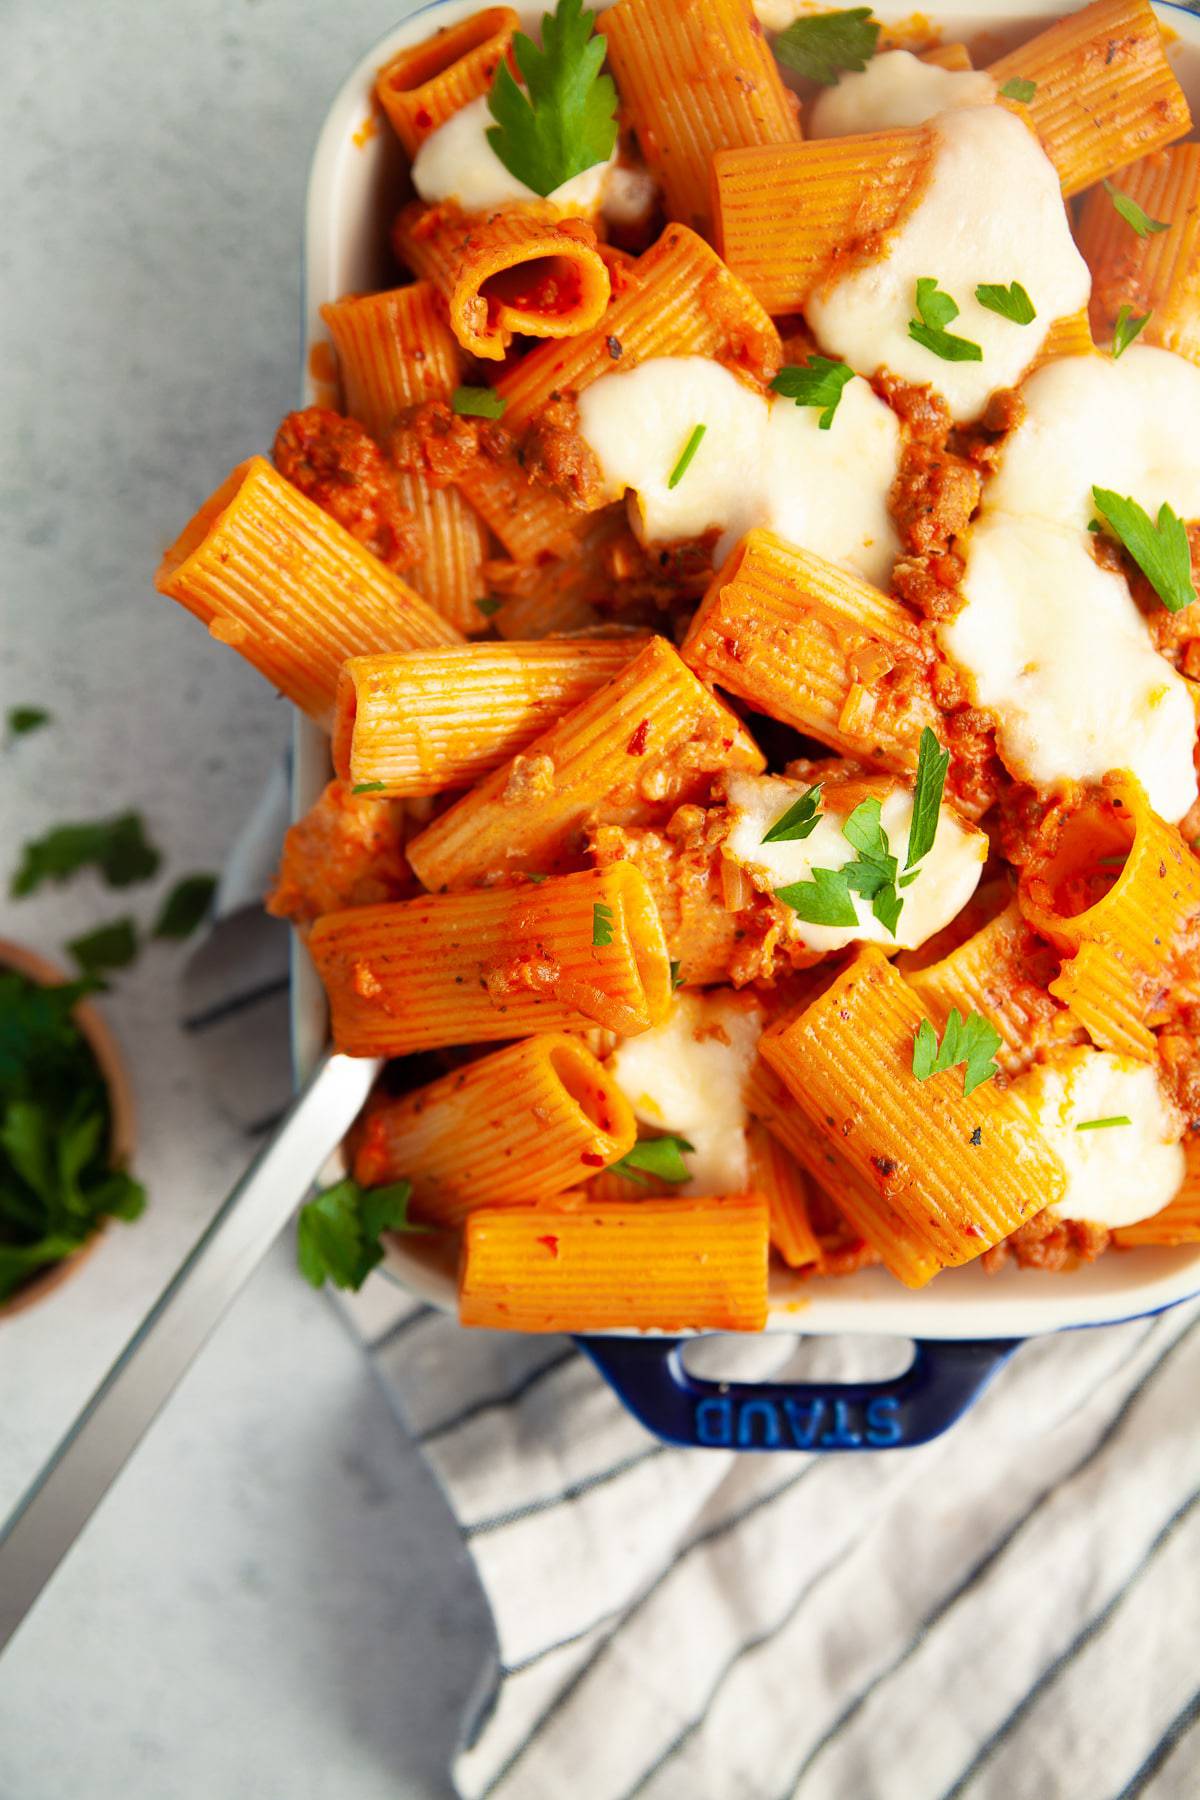 Spicy sausage rigatoni al forno in a baking dish with a spoon, garnished with parsley